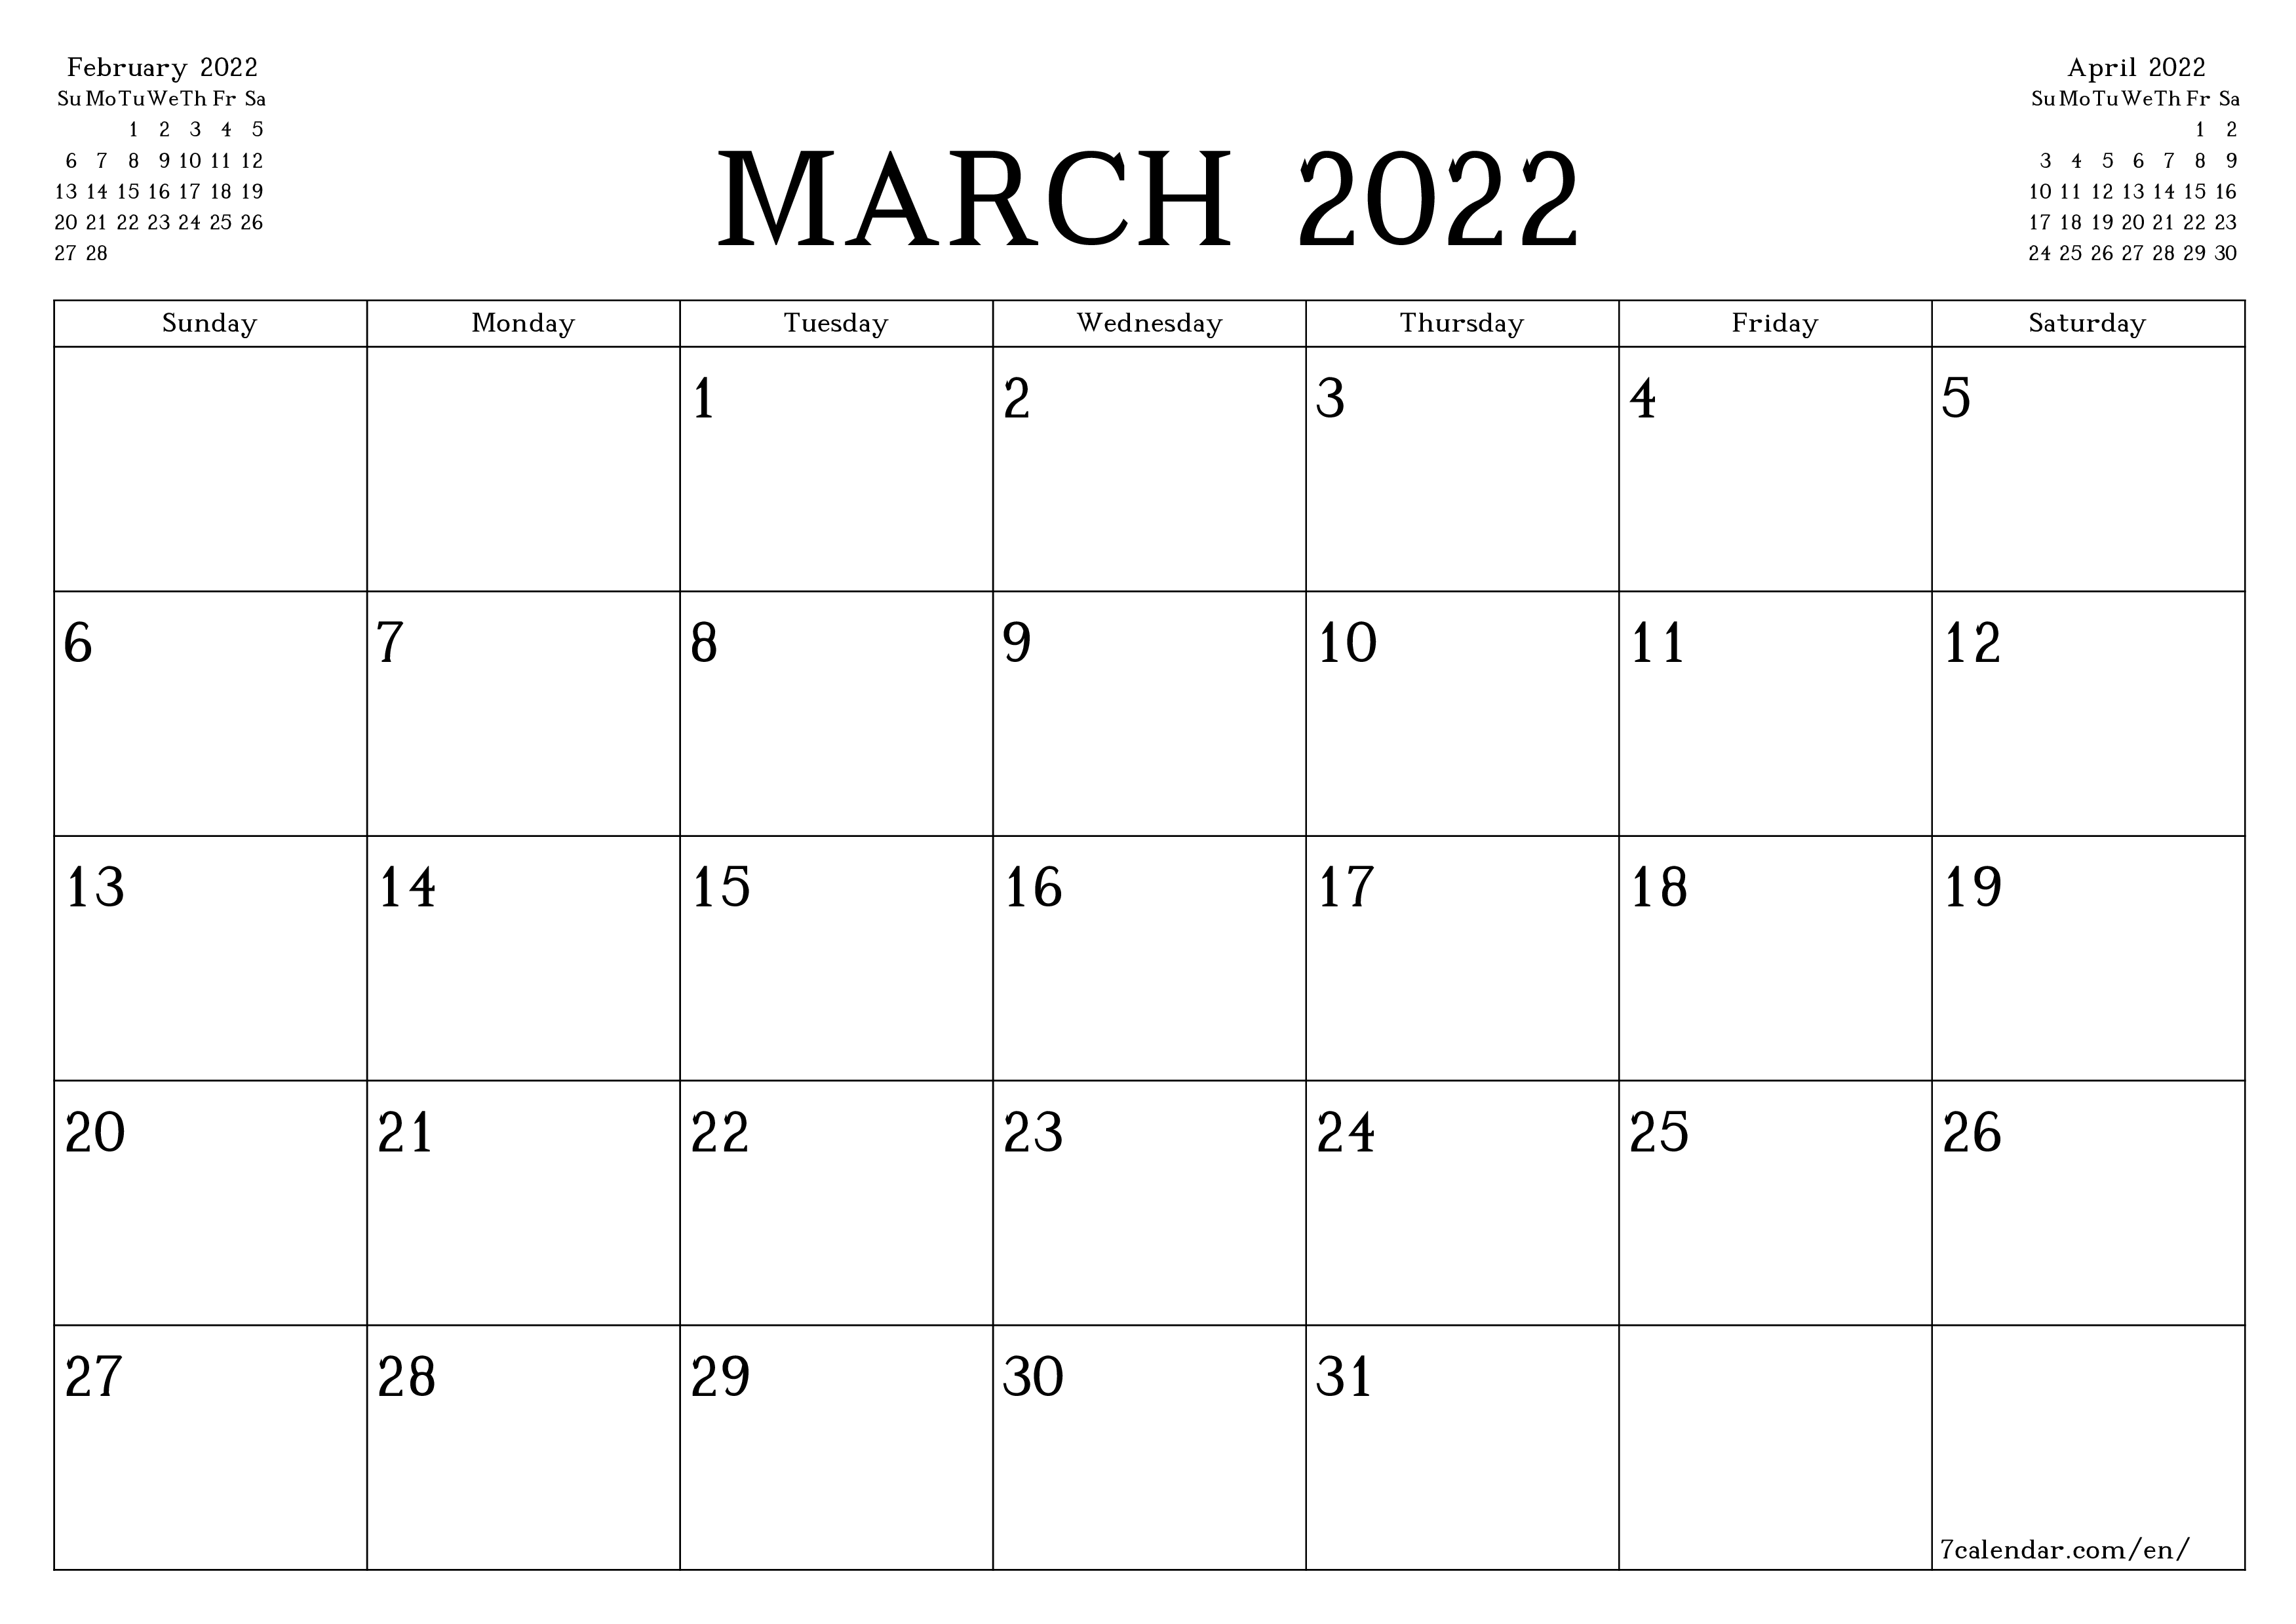 March 2022 Schedule March 2022 Free Printable Calendars And Planners, Pdf Templates - 7Calendar